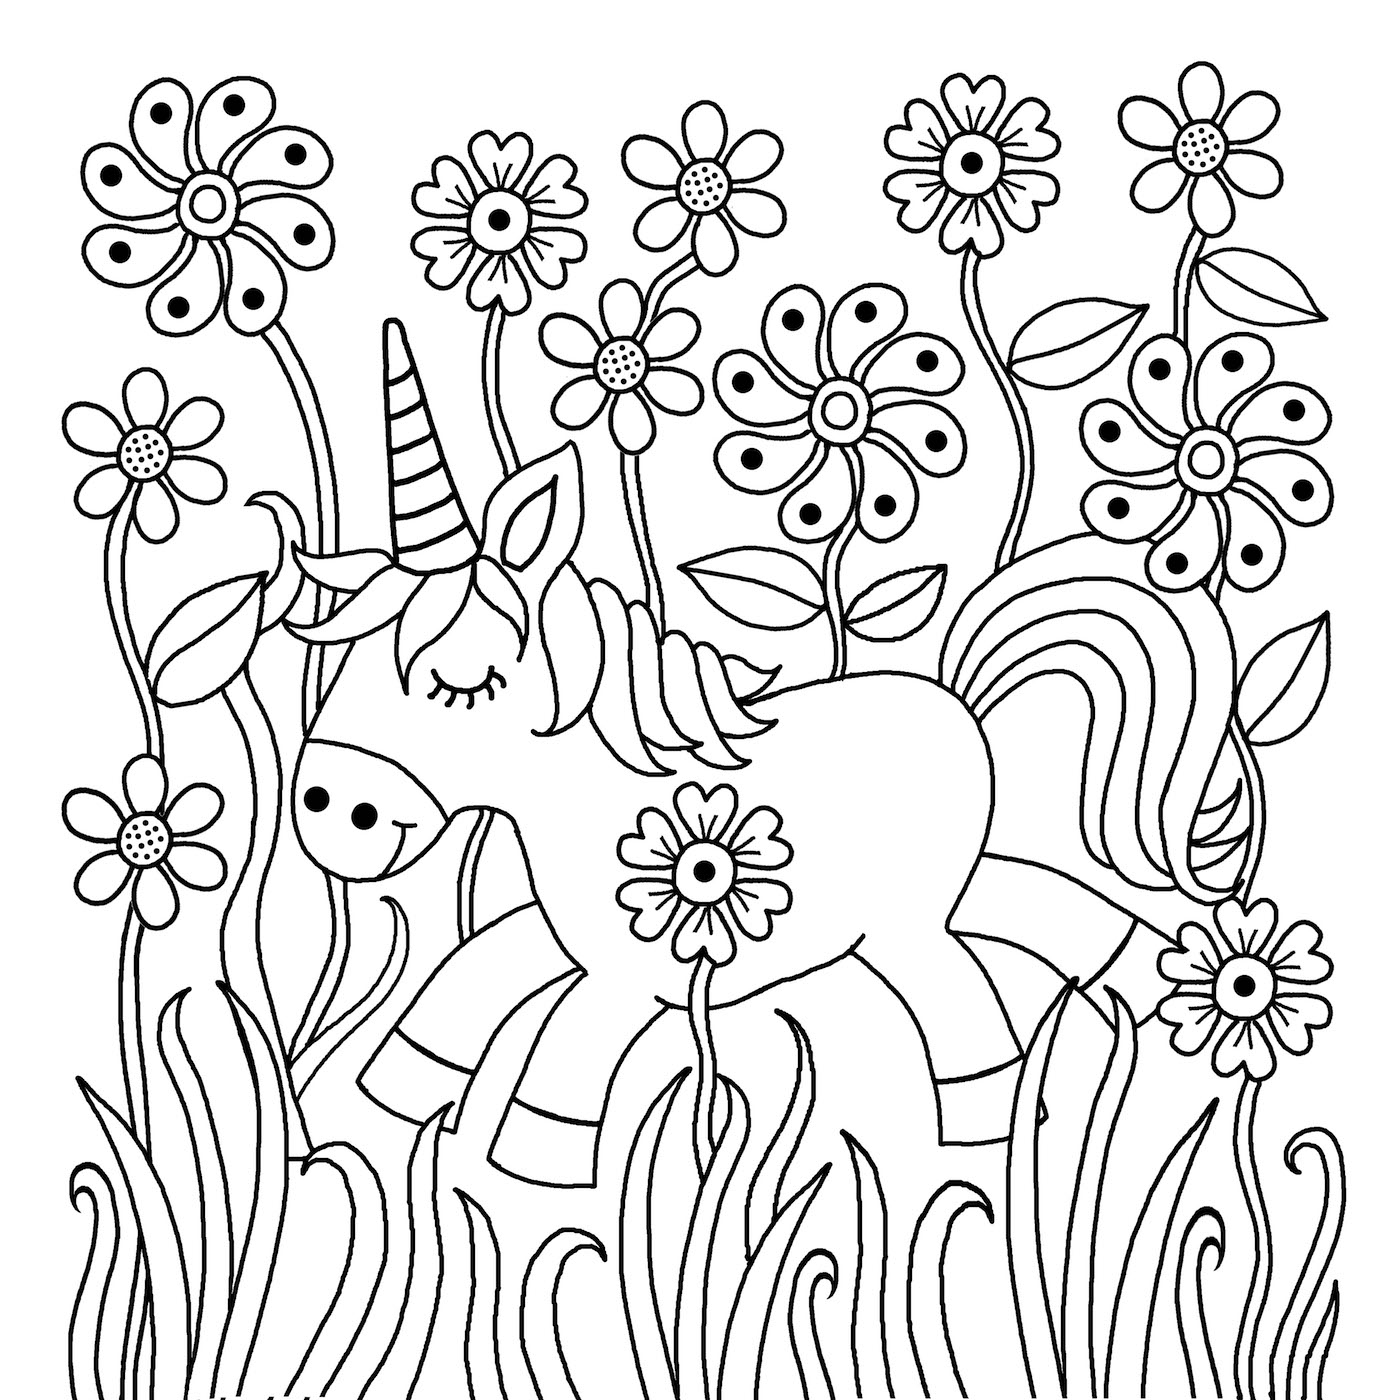 Free Printable Unicorn Colouring Pages for Kids - Buster Children's Books